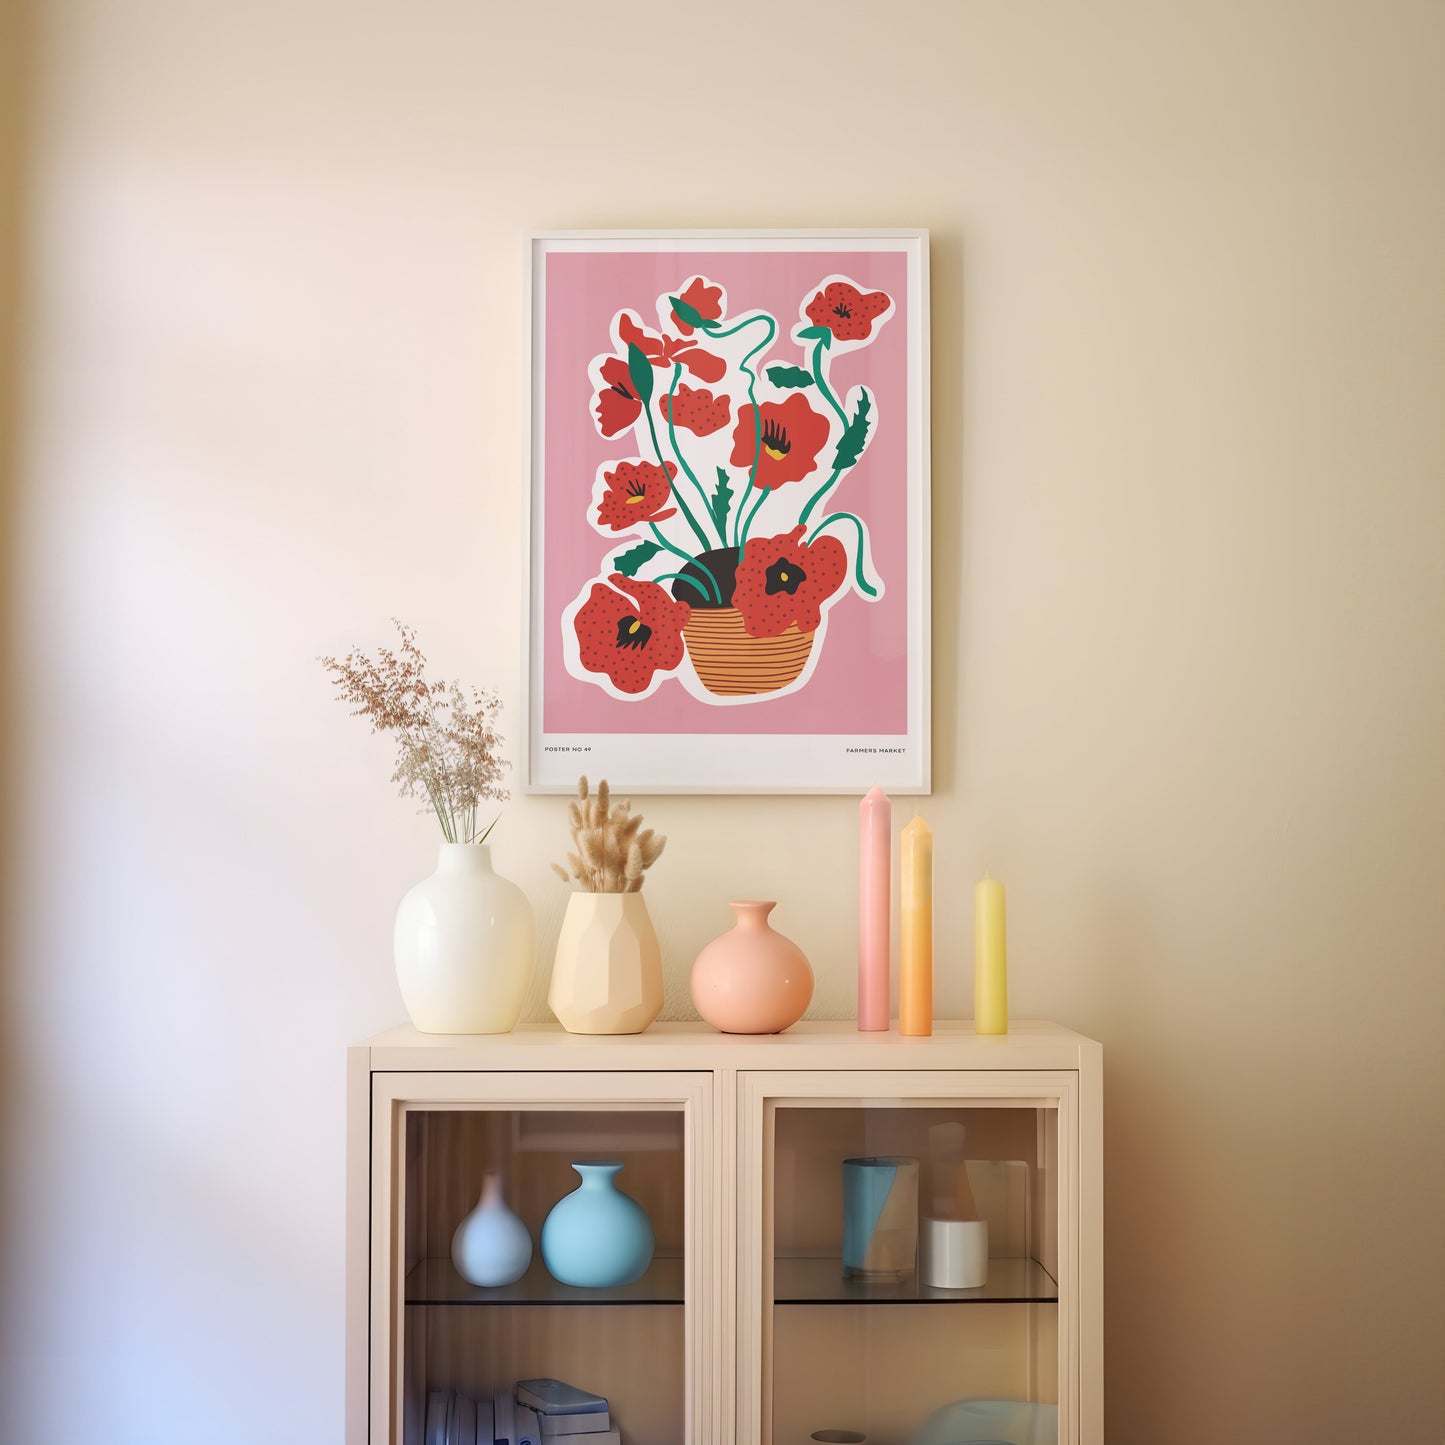 a shelf with vases and a painting on it